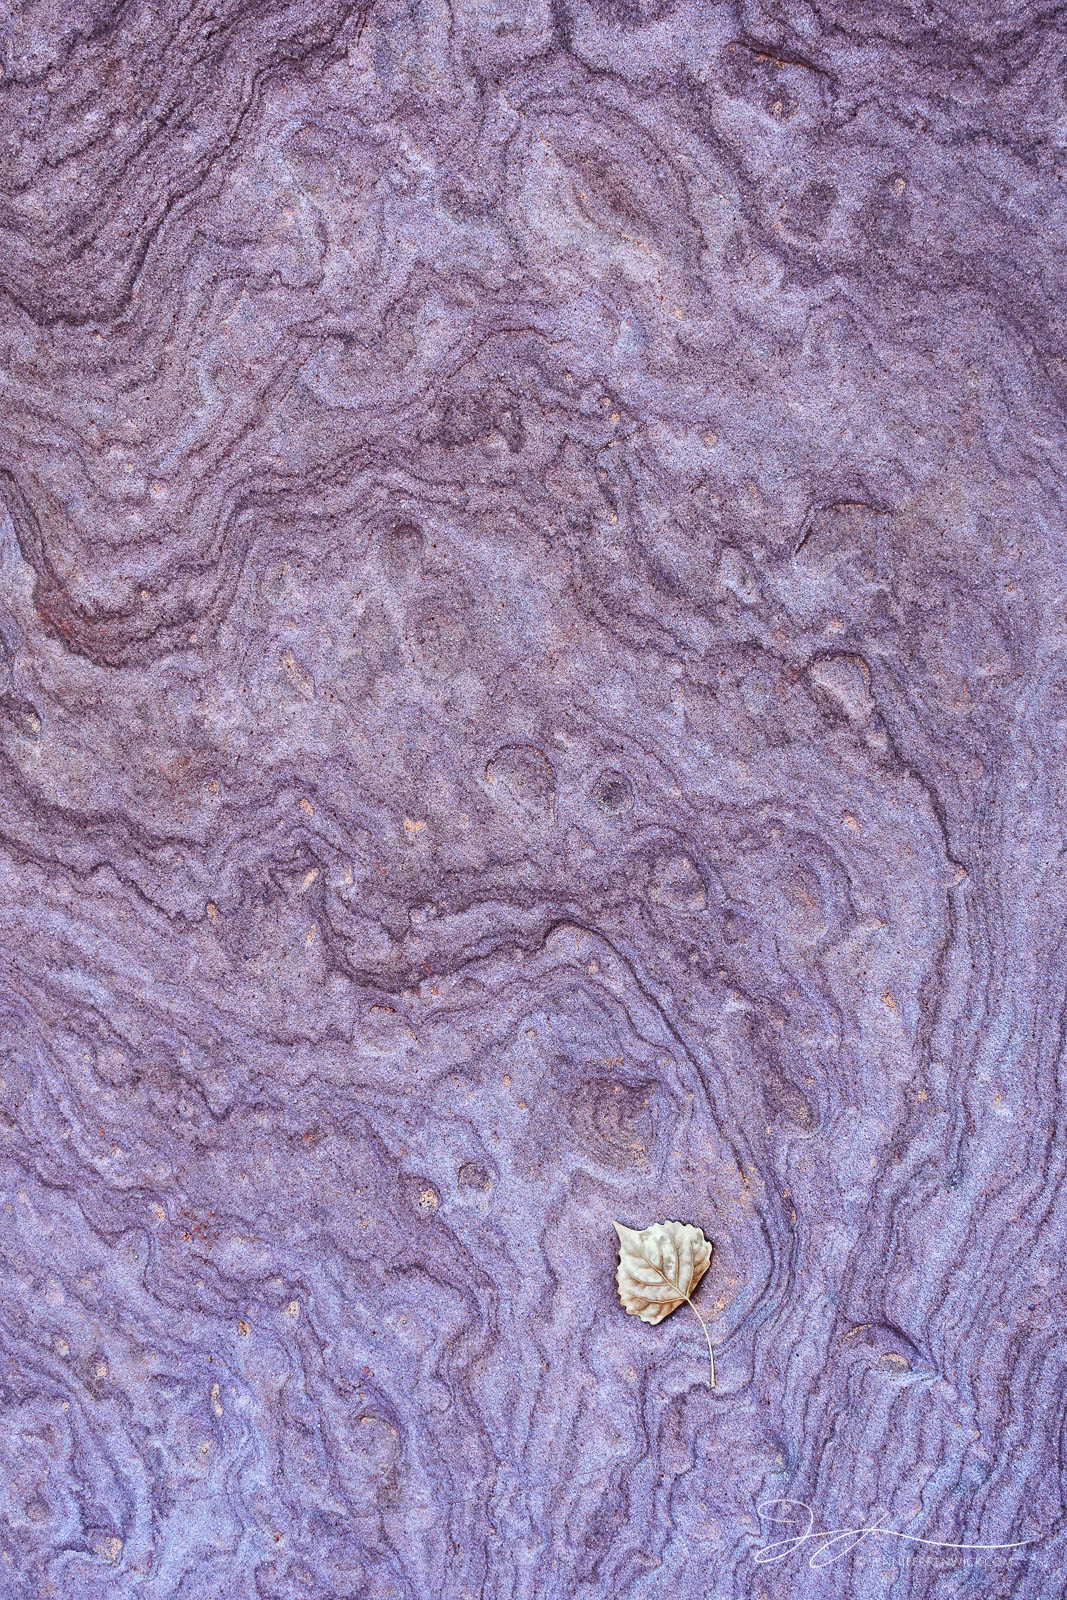 A lone cottonwood leaf rests on a swirl of sandstone.